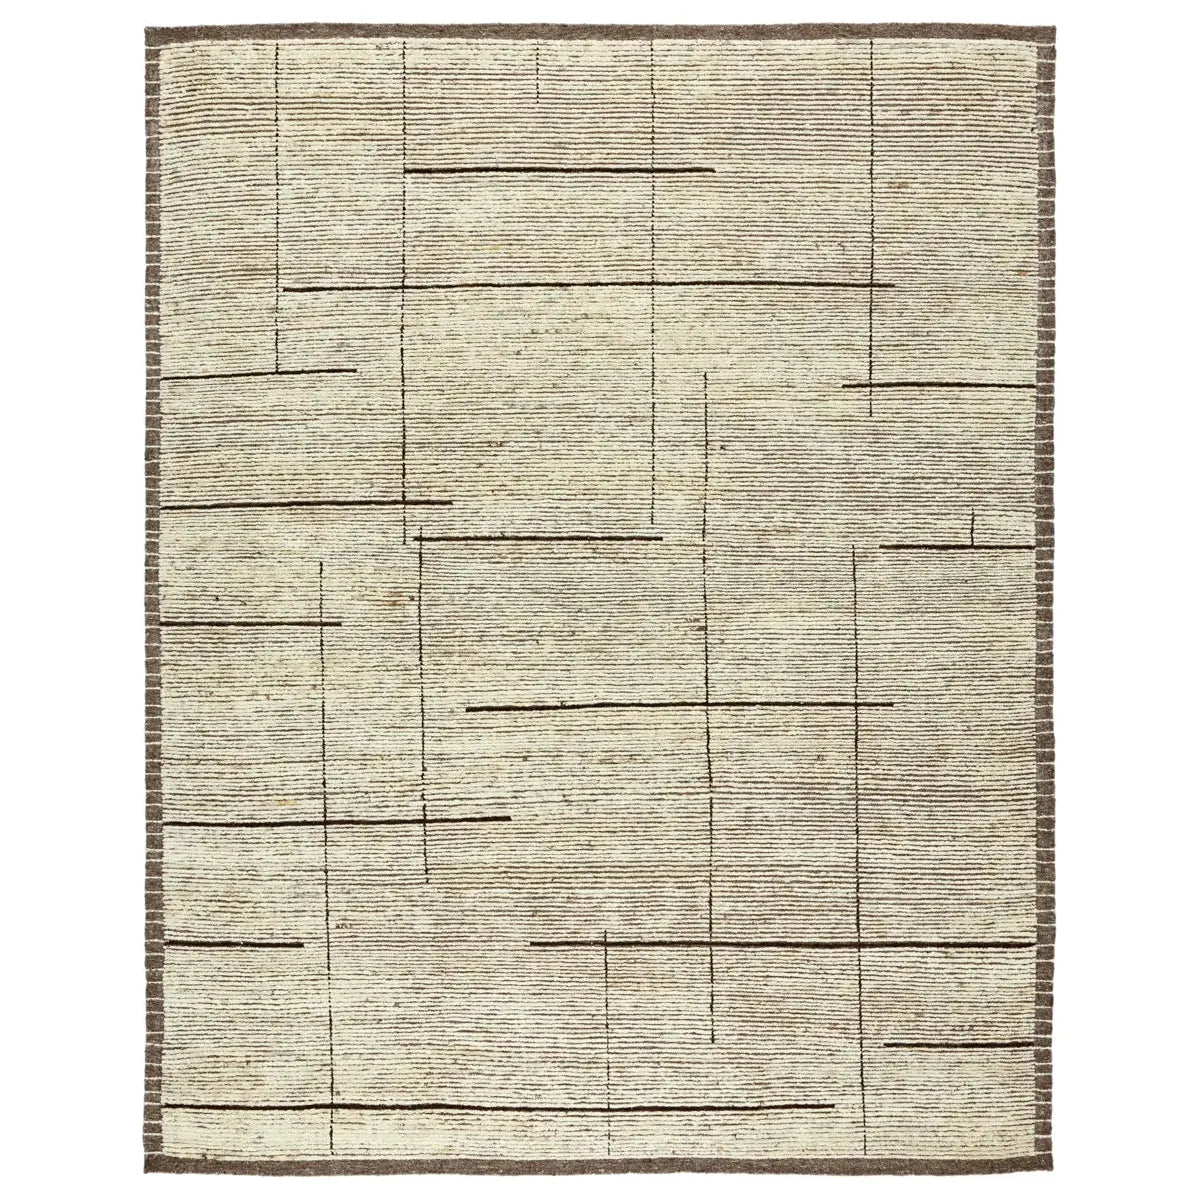 Subtle linear textures and natural colorways define the irresistible quality of the Seora collection. The Dorian area rug features a series of parallel and perpendicular lines for an intriguing dose of modern appeal. Amethyst Home provides interior design services, furniture, rugs, and lighting in the Miami metro area.